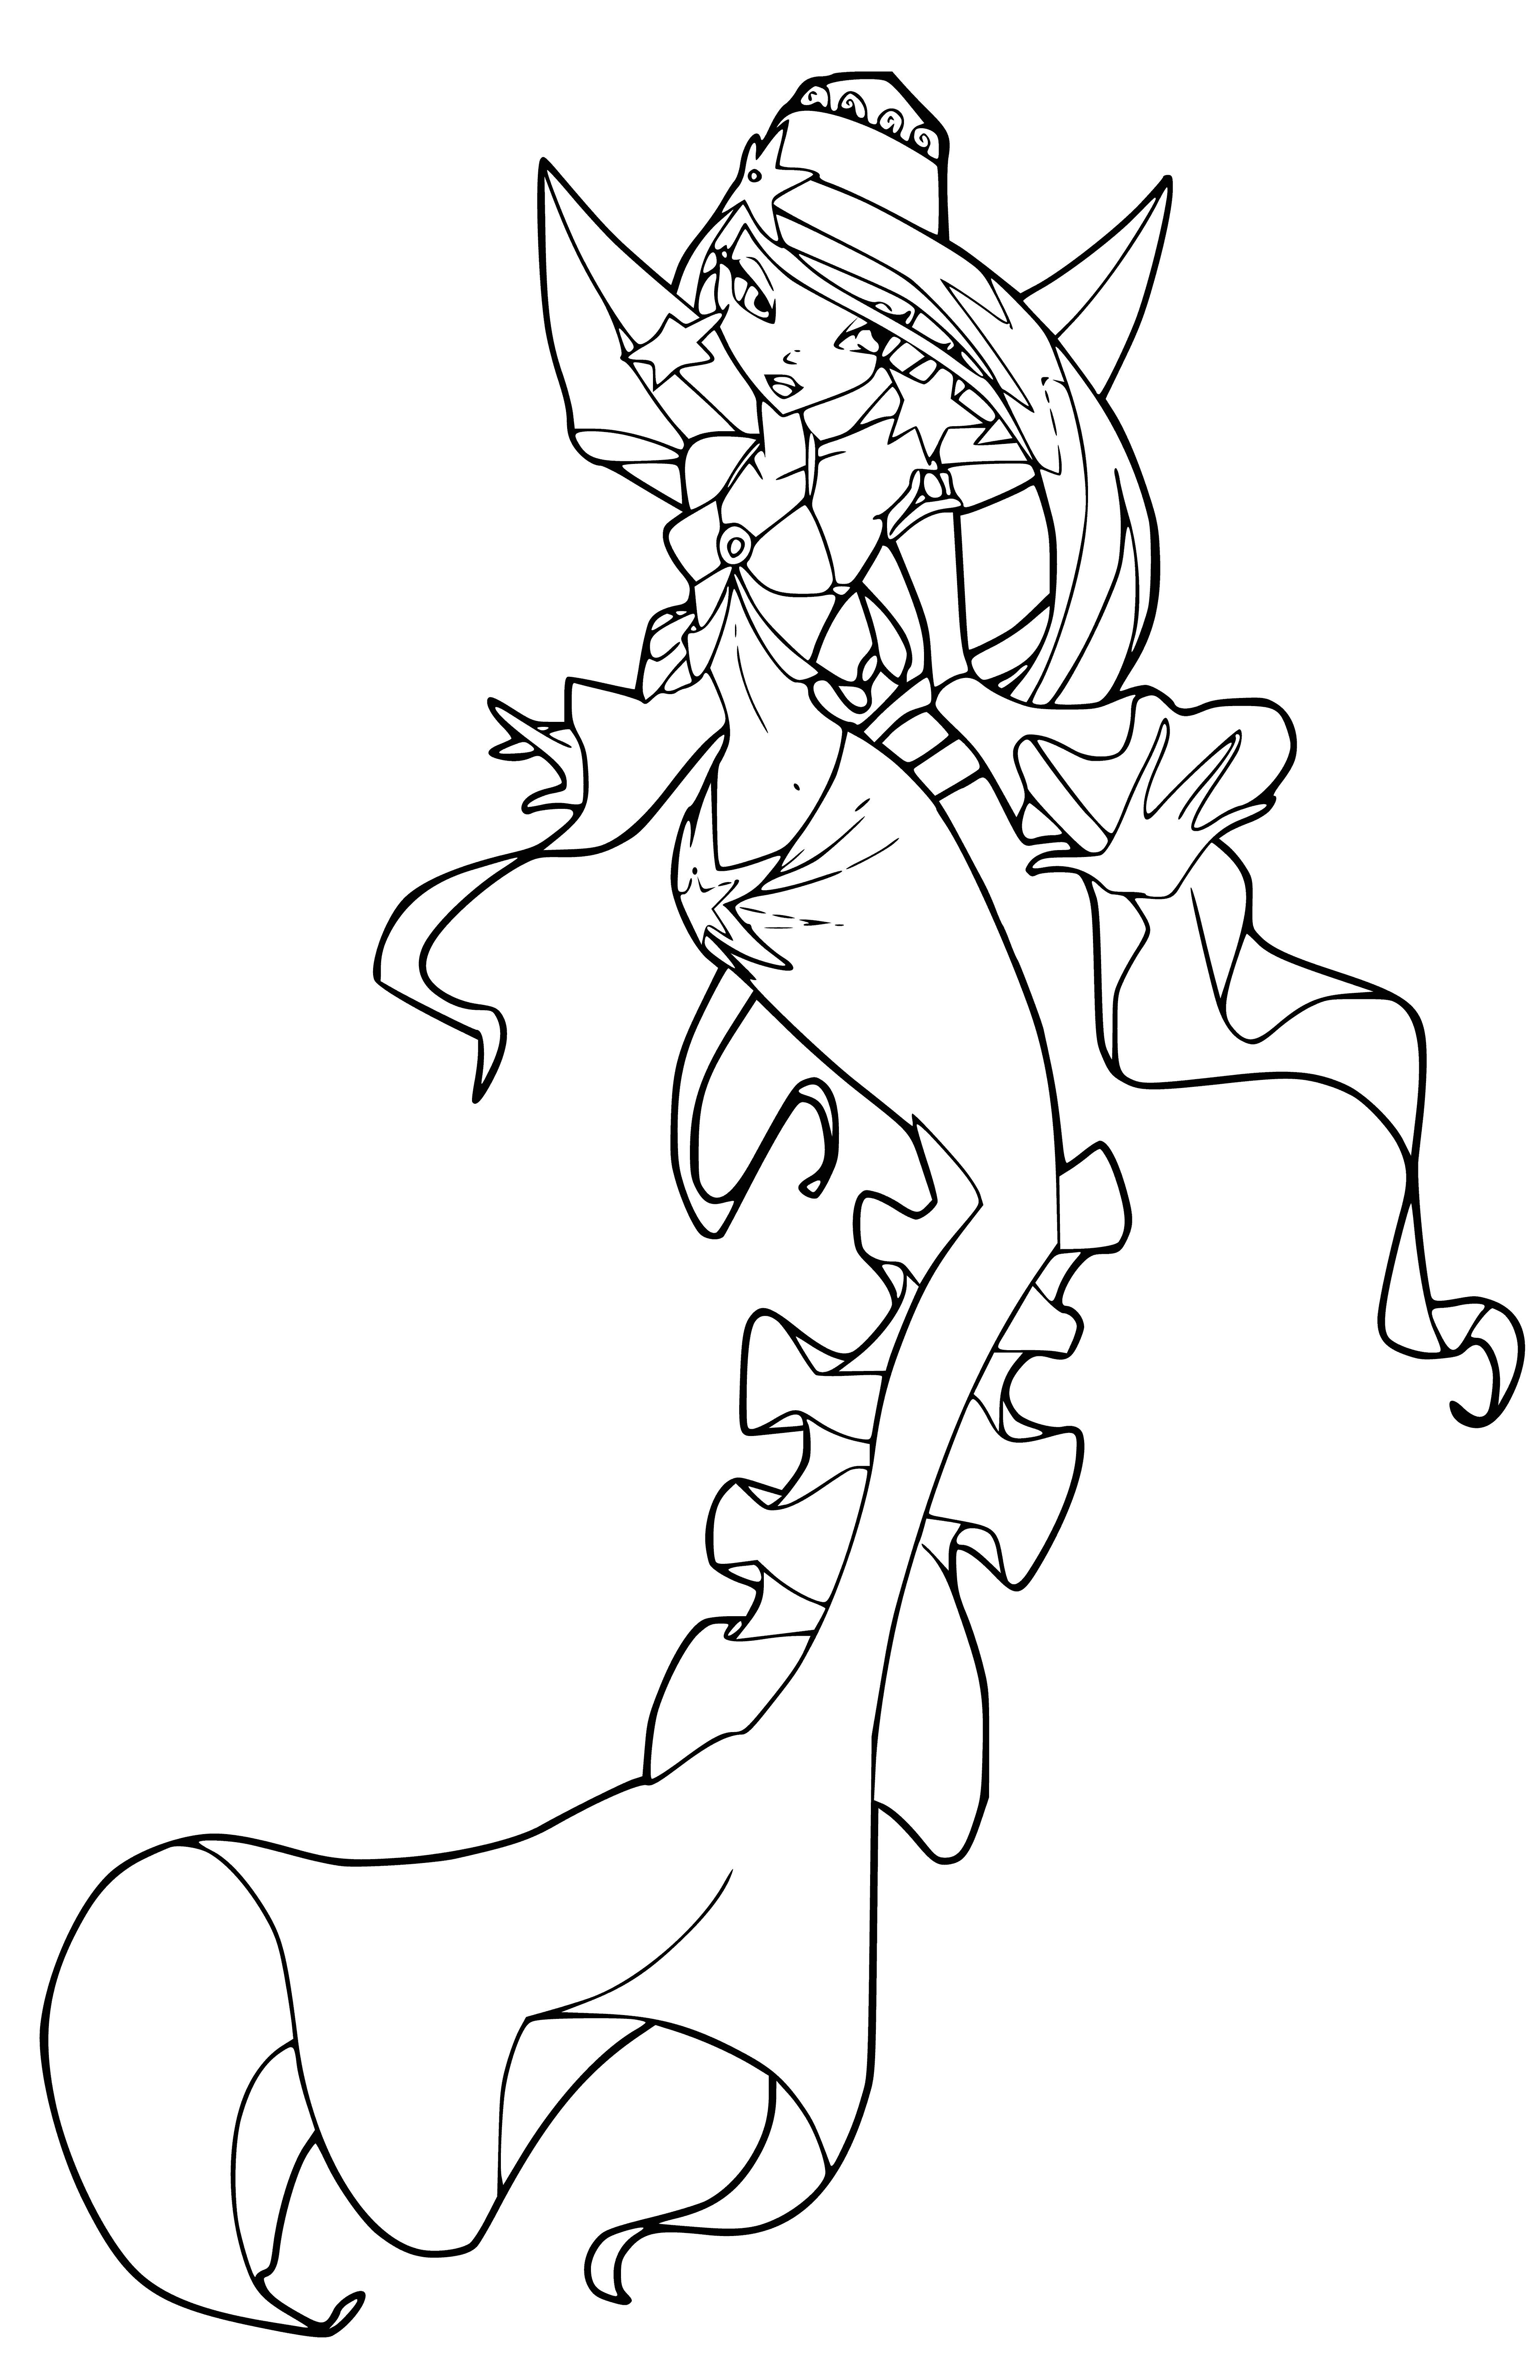 coloring page: "Fish-headed humanoids with flowing hair, dressed in seaweed, peacefully carrying shells and other sea creatures."